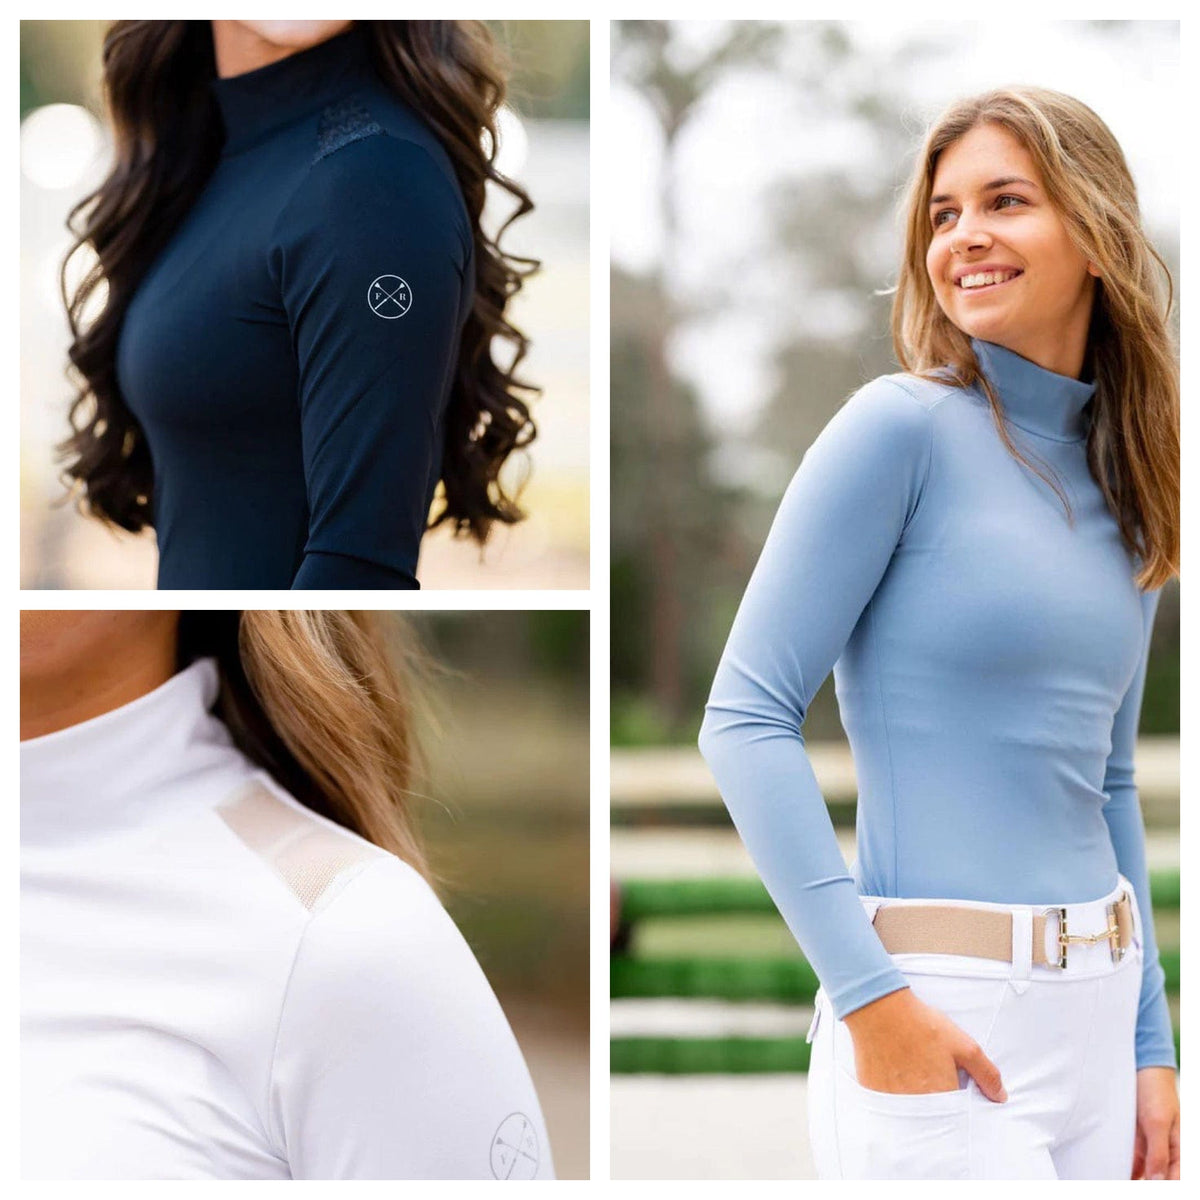 Free Ride Equestrian Competition Shirt Free Ride- Eliza Base Layer Shirt equestrian team apparel online tack store mobile tack store custom farm apparel custom show stable clothing equestrian lifestyle horse show clothing riding clothes horses equestrian tack store